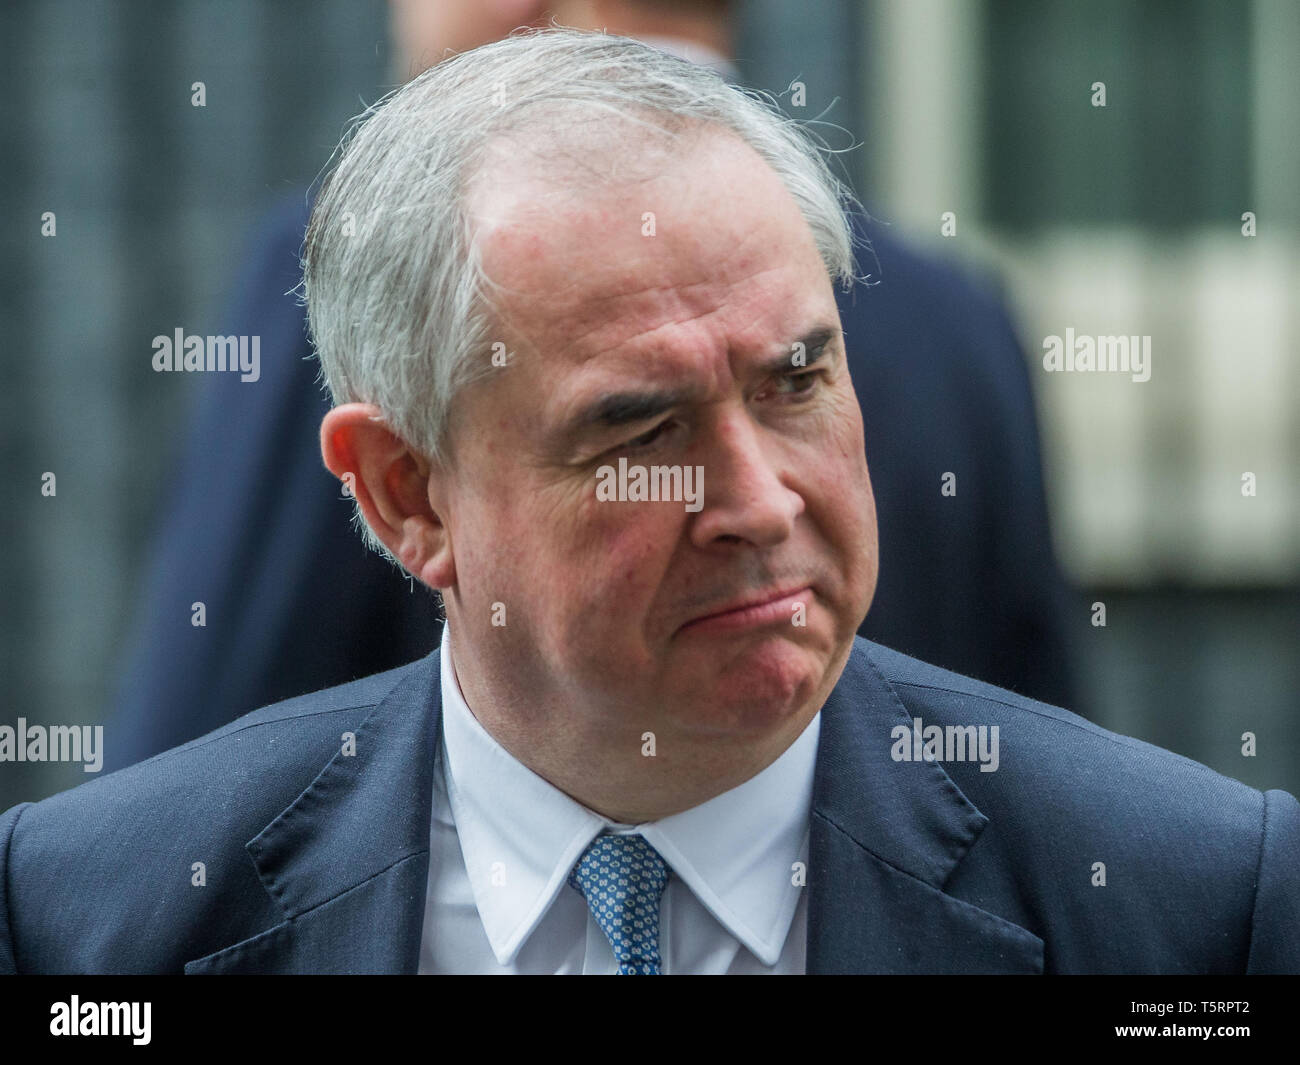 Ministers depart Downing Street following Cabinet Meeting.  Featuring: Geoffrey Cox QC MP Where: London, United Kingdom When: 26 Mar 2019 Credit: Wheatley/WENN Stock Photo